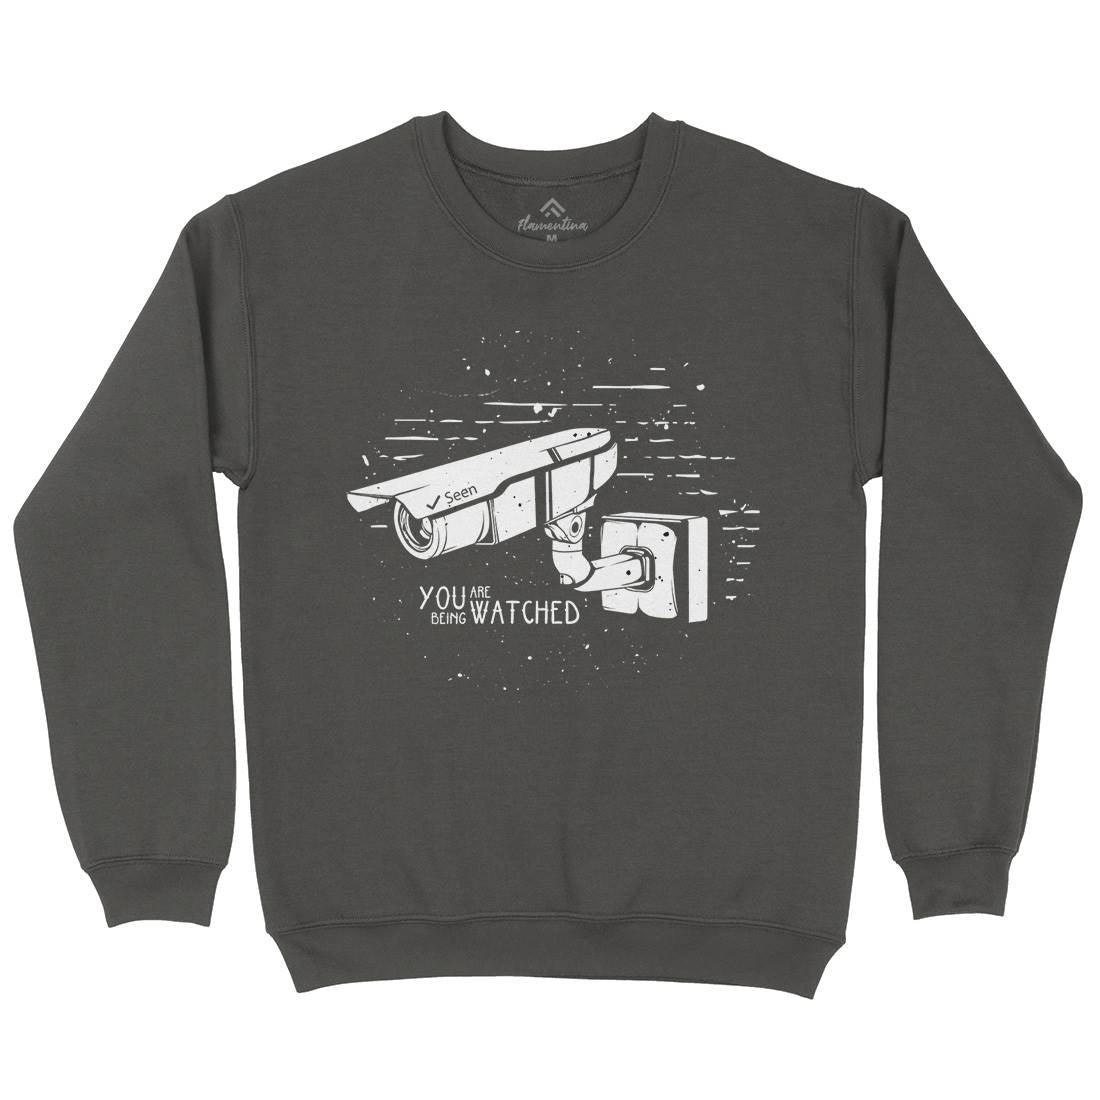 You Are Being Watched Mens Crew Neck Sweatshirt Media D499